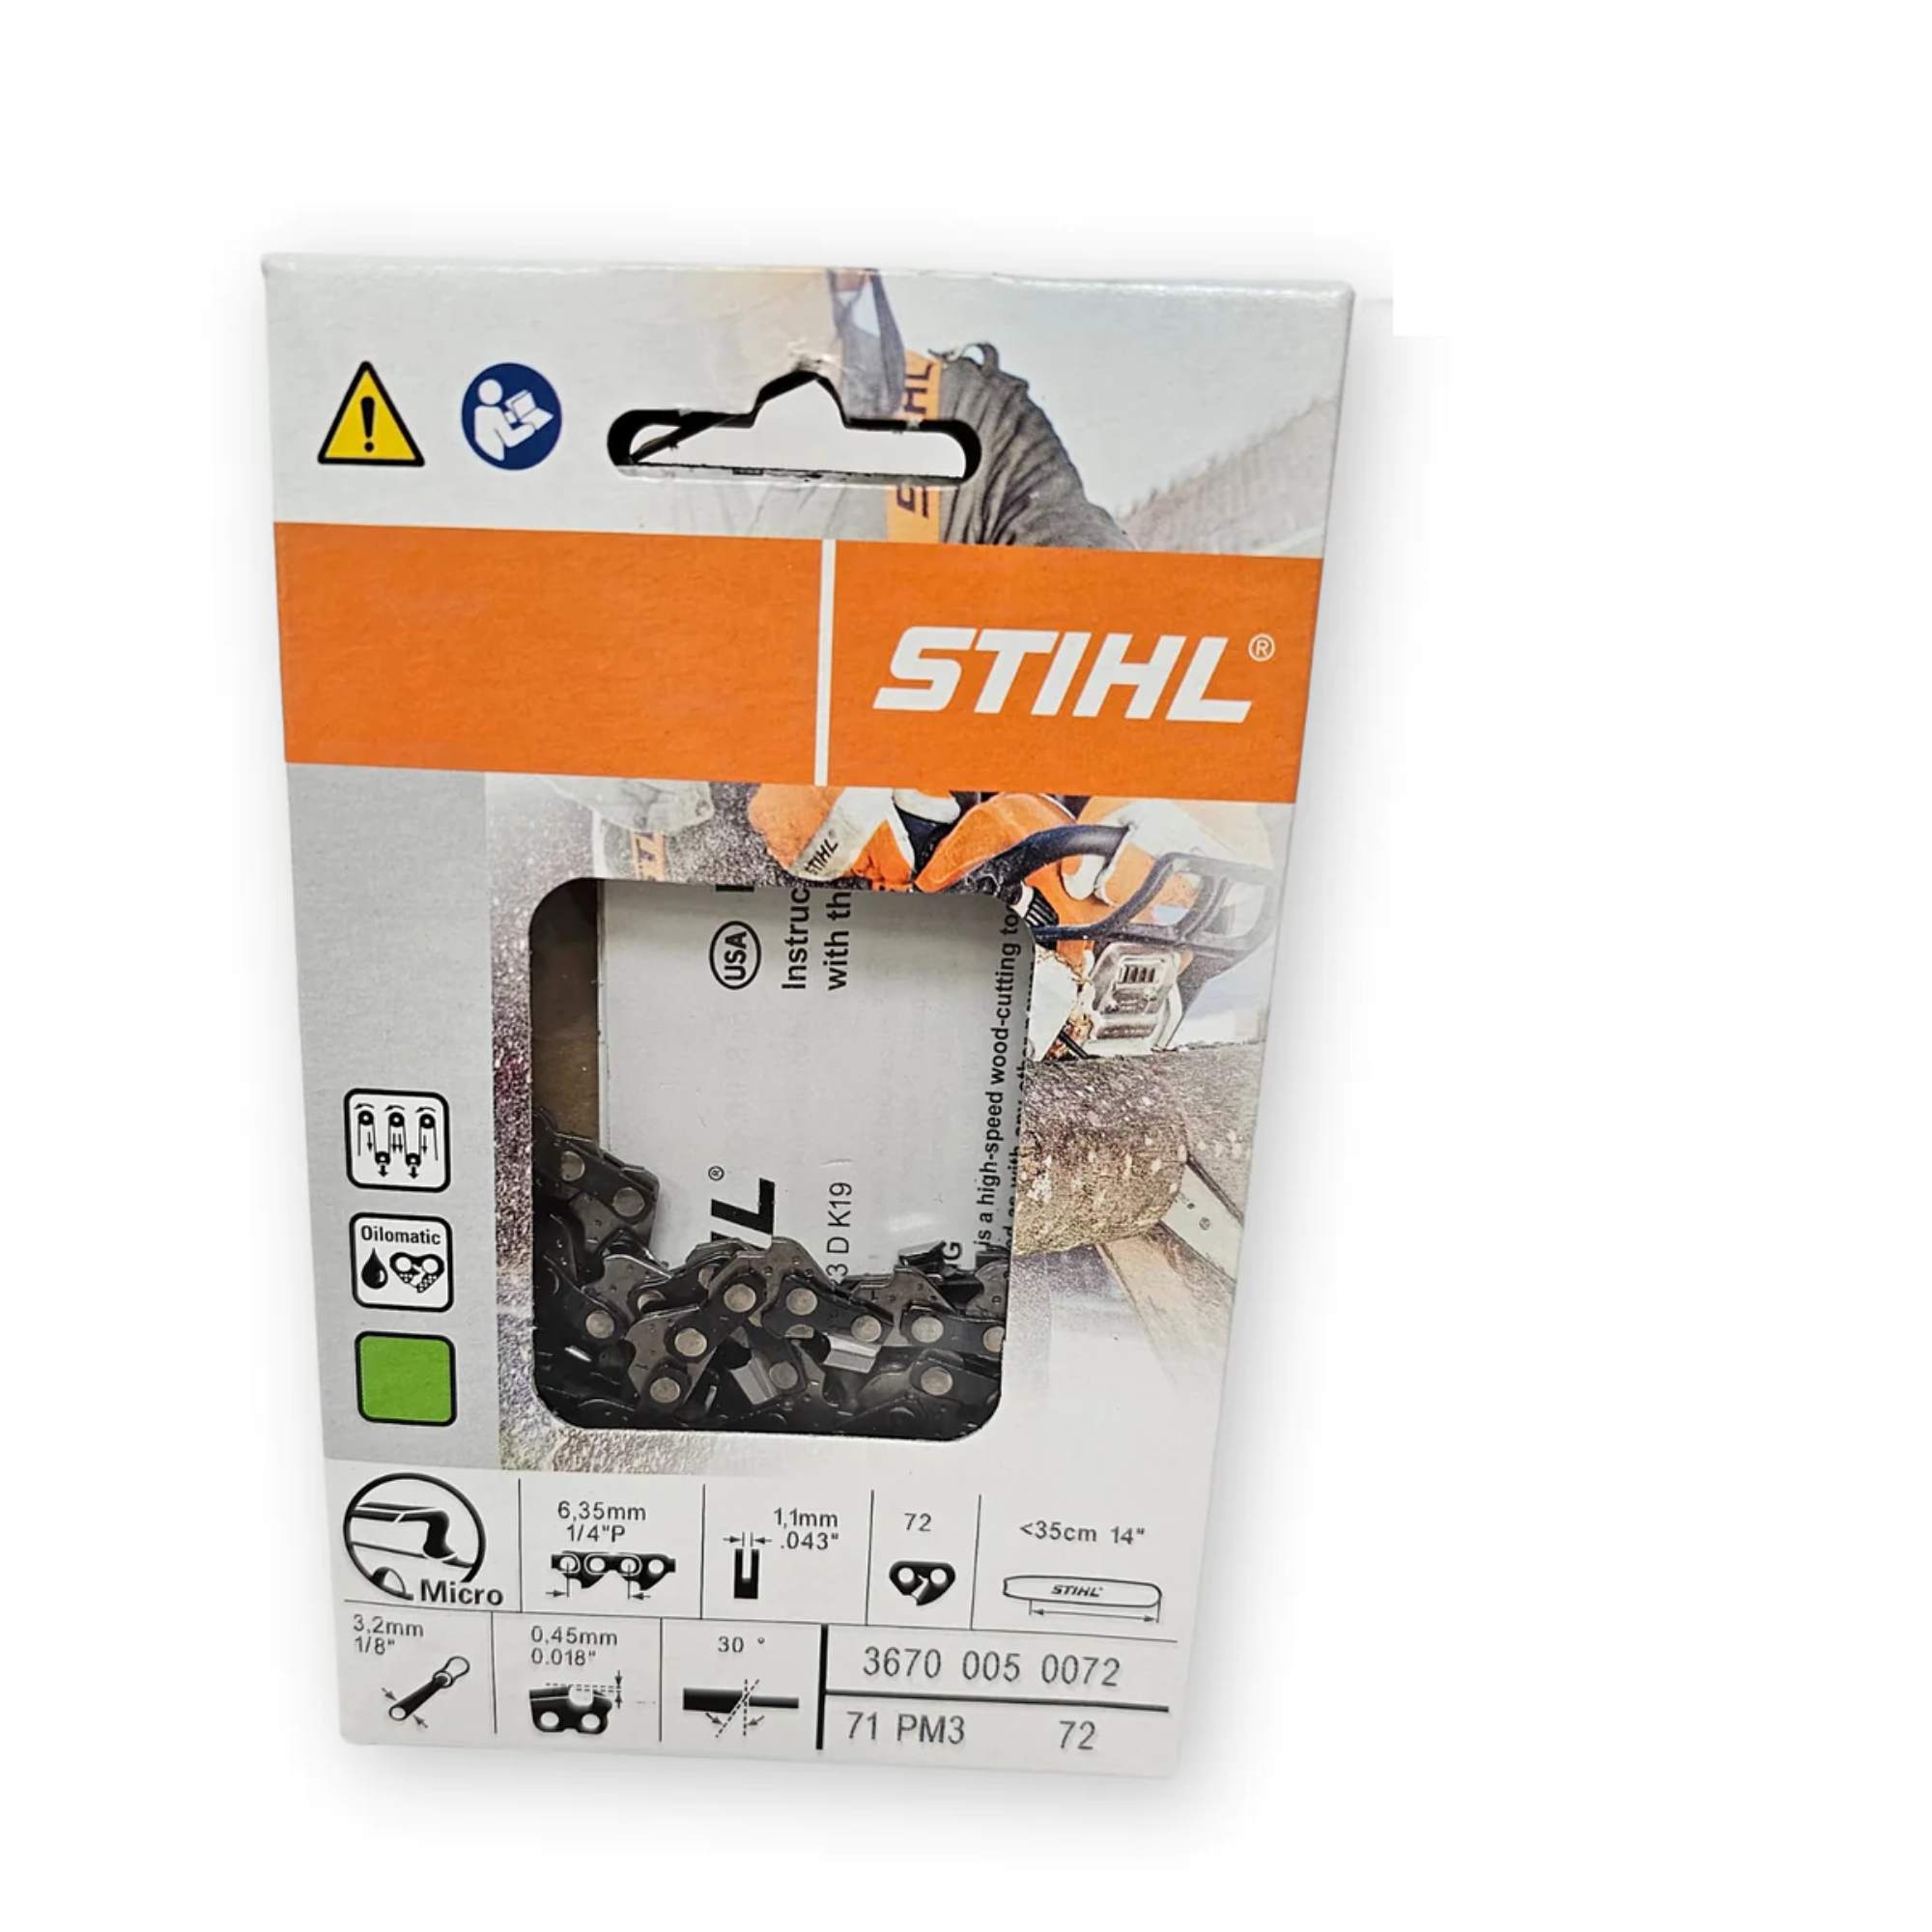 <FONT COLOR=RED >BULK </FONT COLOR=RED > | Stihl Oilomatic Picco Micro 3 | 71 PM3 72 | 14 in. | 72 Drive Links | Chainsaw Chain | 3670 005 0072